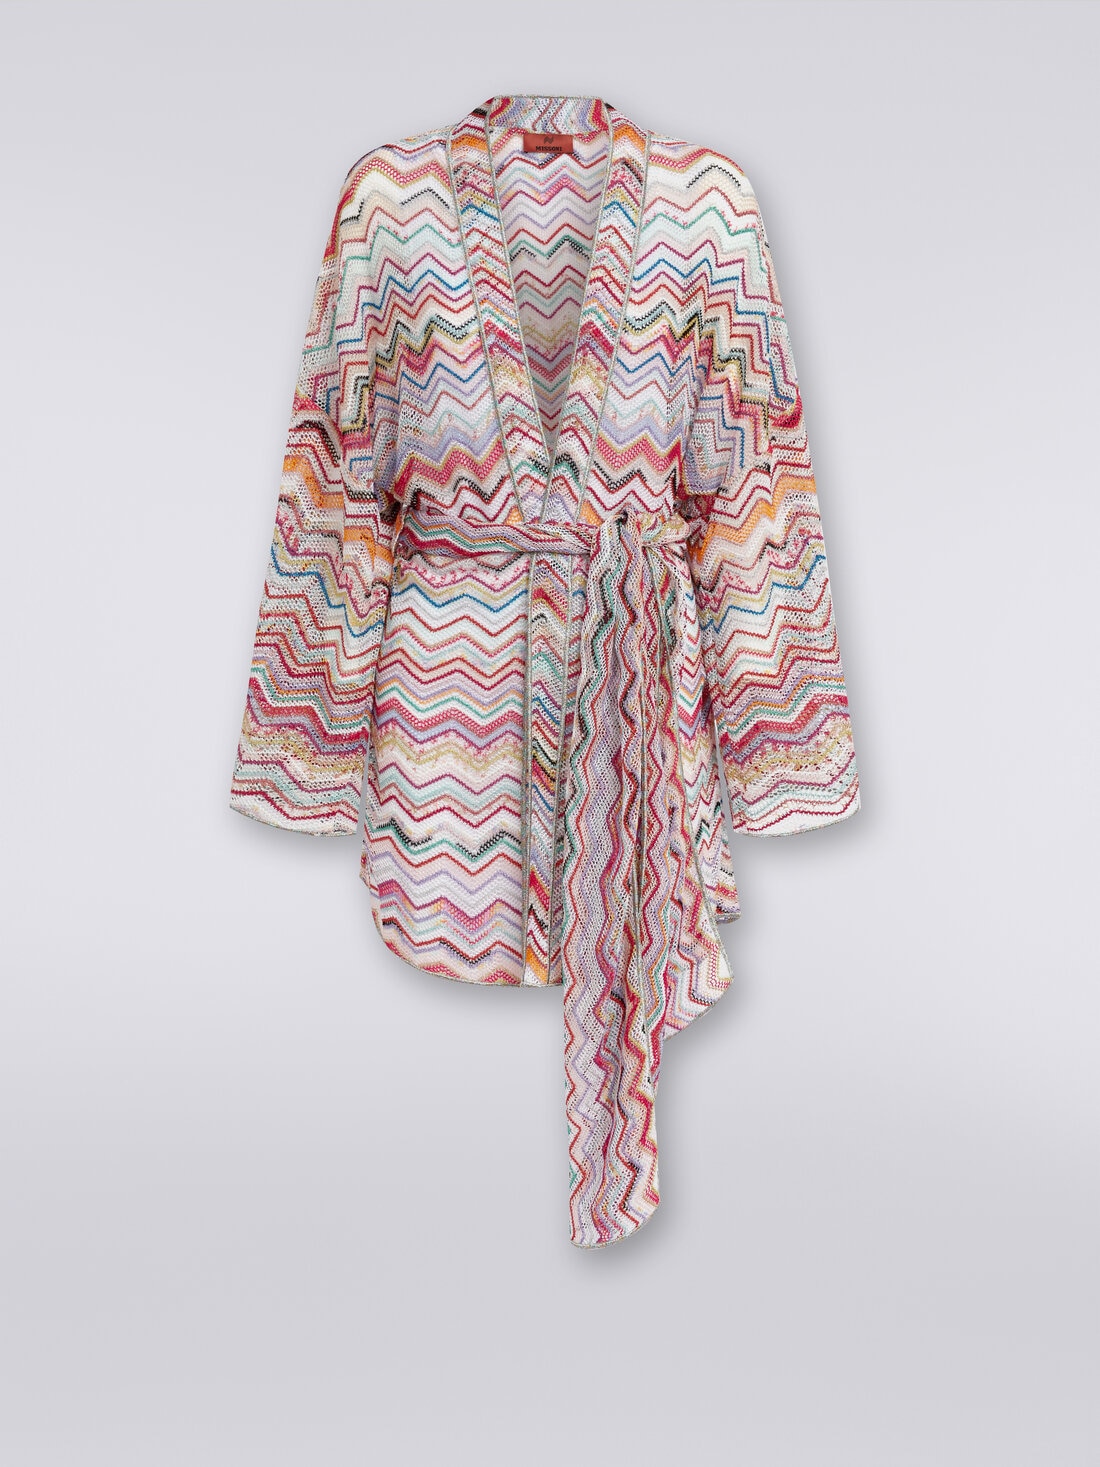 Dressing gown cover up in zigzag crochet with lurex, Multicoloured  - MS24SQ0EBR00TISM99I - 0